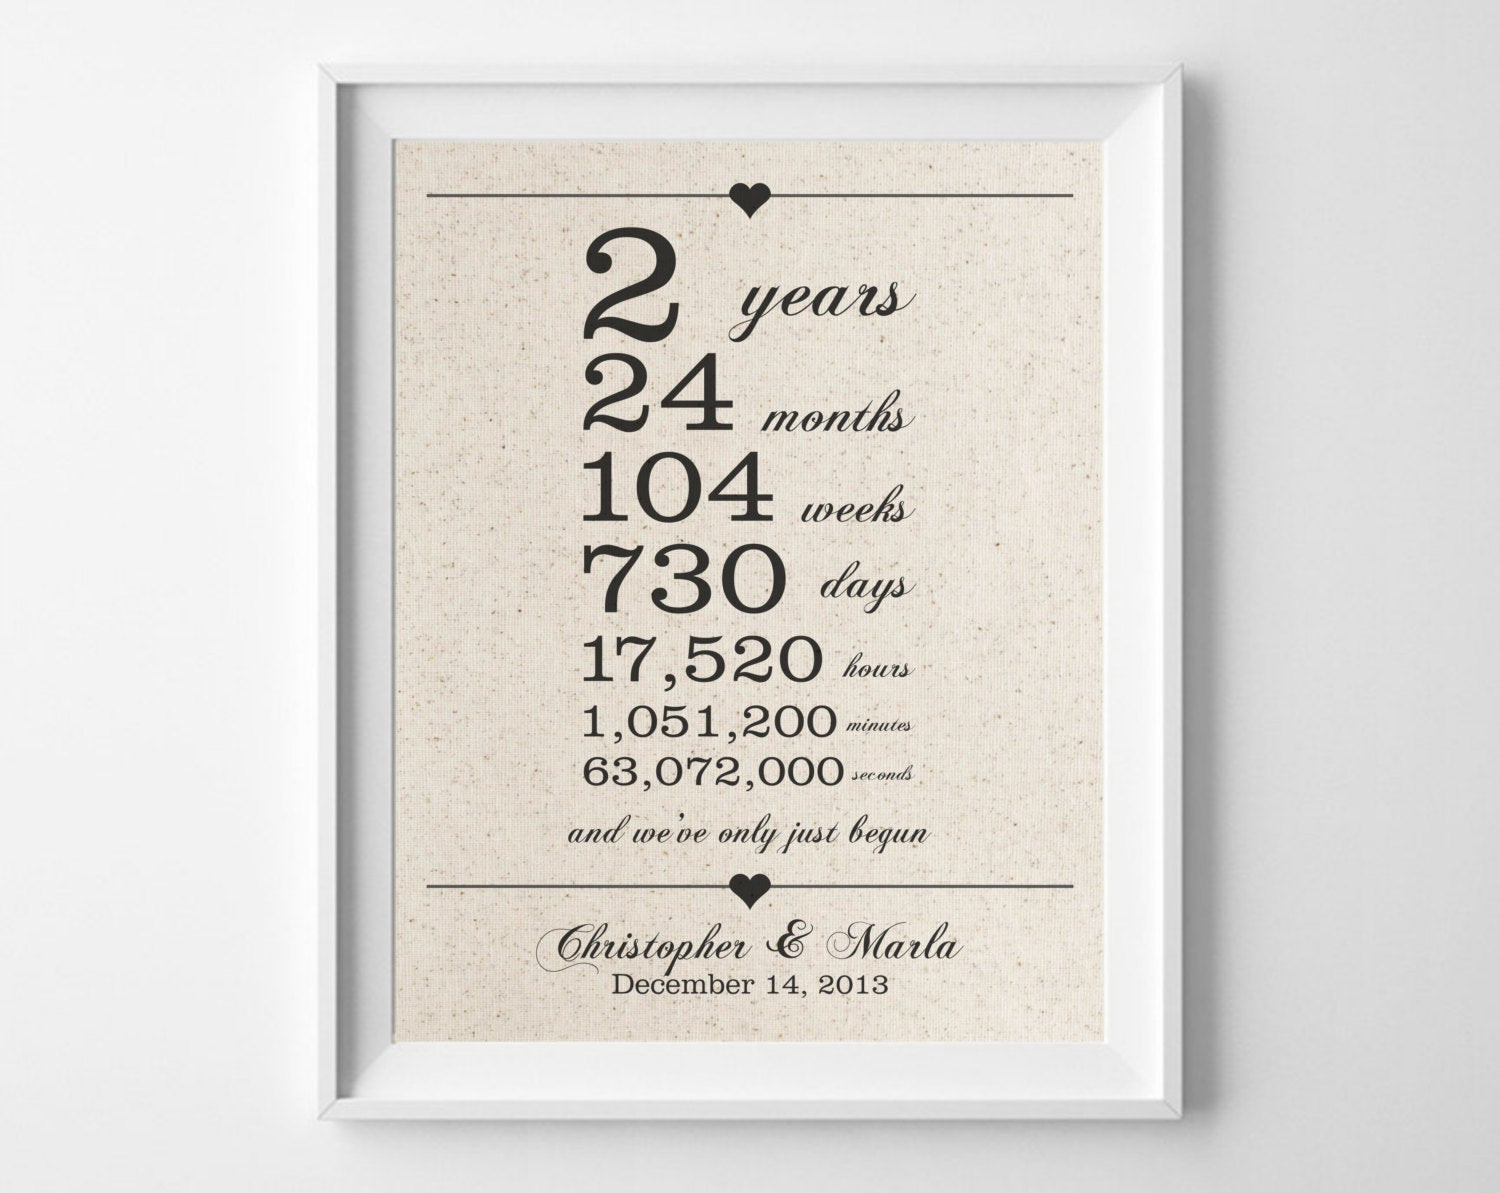 Second Anniversary Cotton Gift Ideas
 2 years to her Cotton Anniversary Print 2nd Anniversary